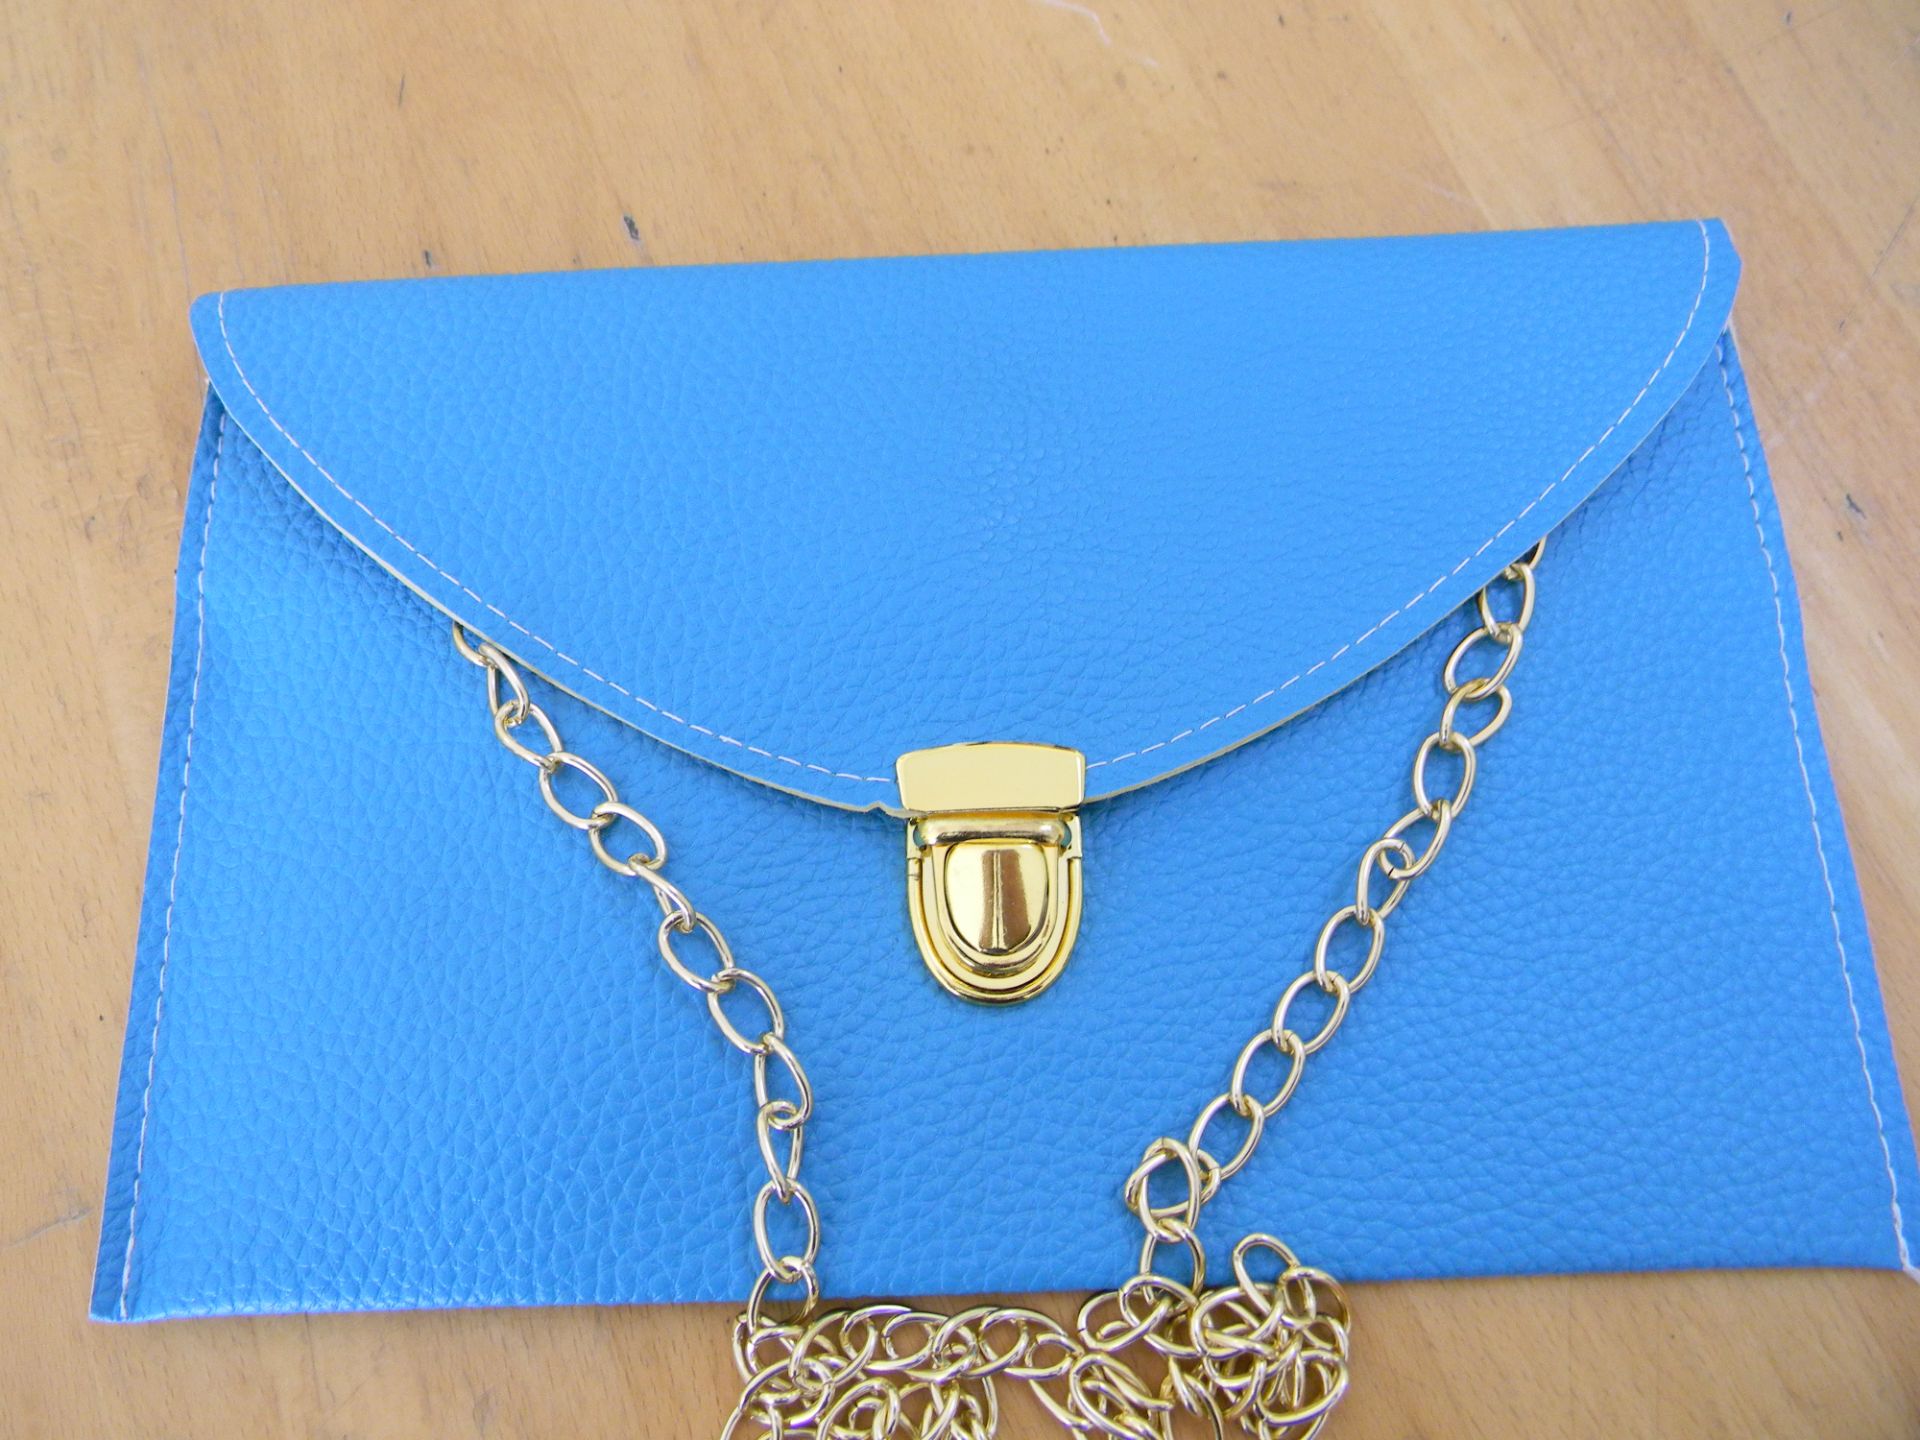 Turquoise ladies Chain bag shoulder evening clutch bag - Image 2 of 4